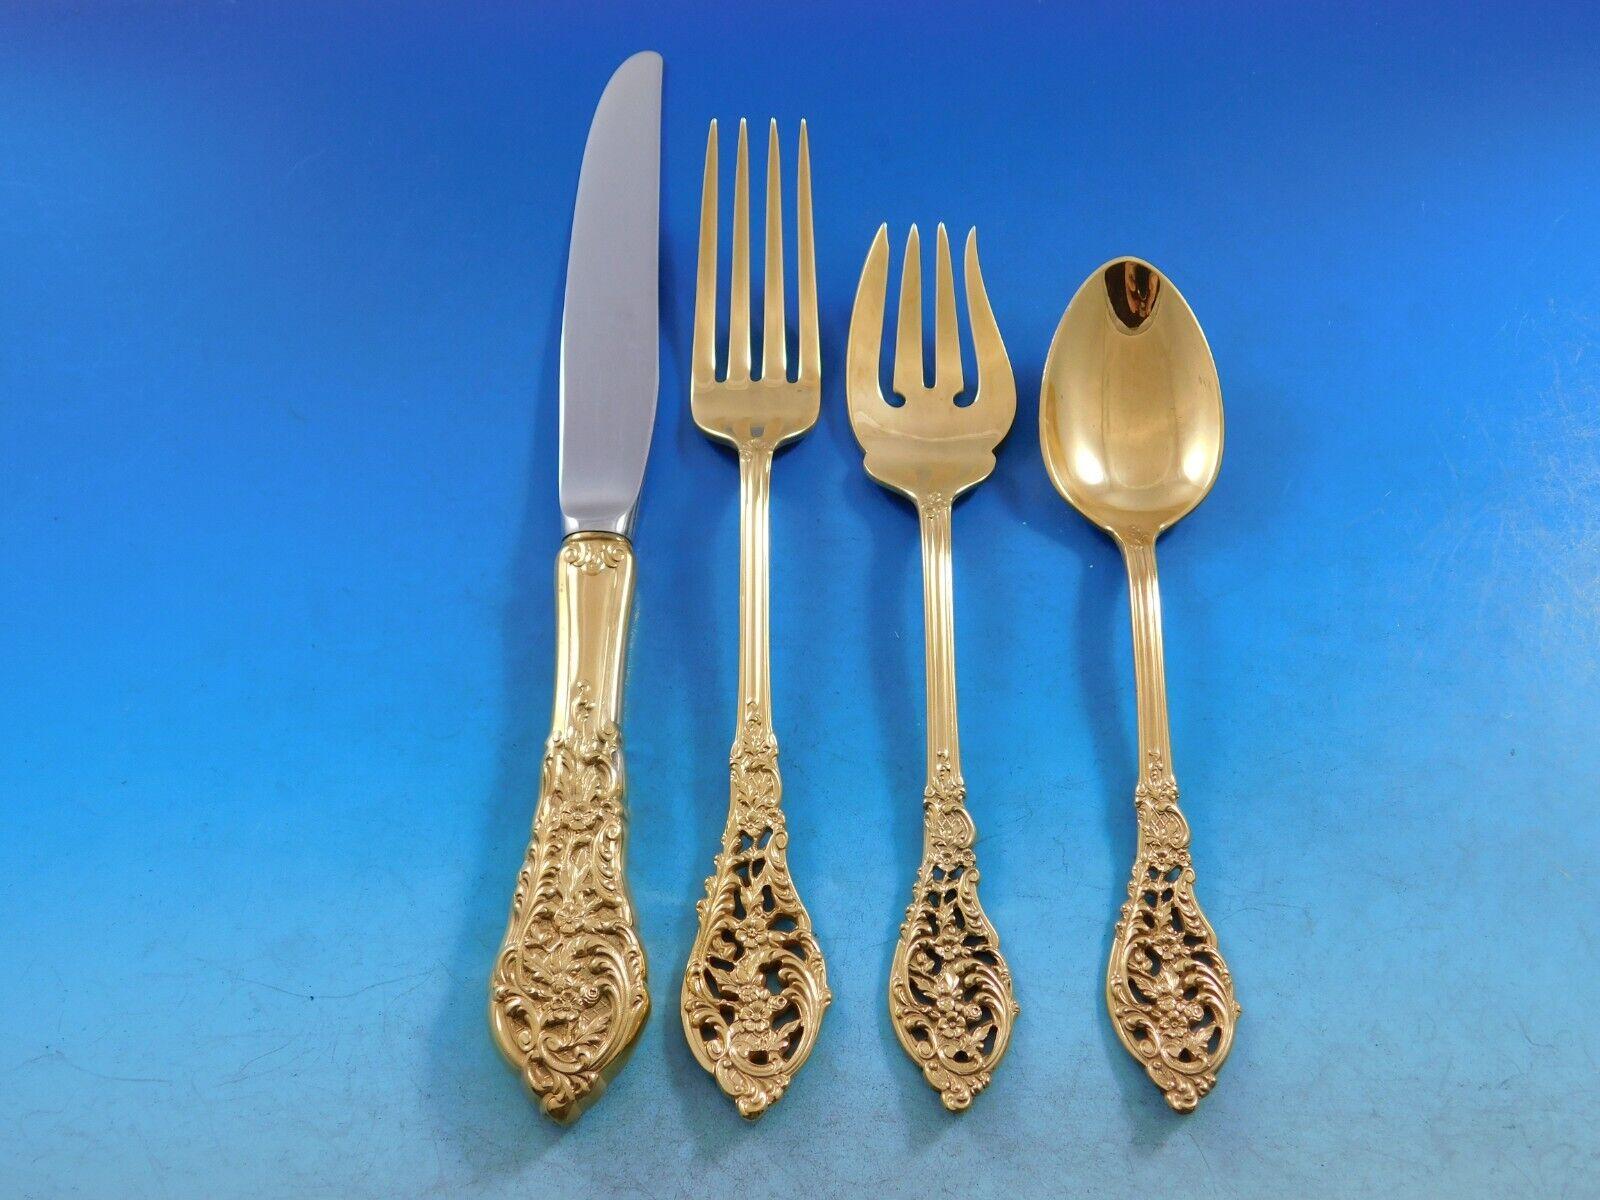 Florentine Lace Gold by Reed & Barton Sterling Silver flatware set - 61 pieces. This set includes:

12 Regular Knives, 9